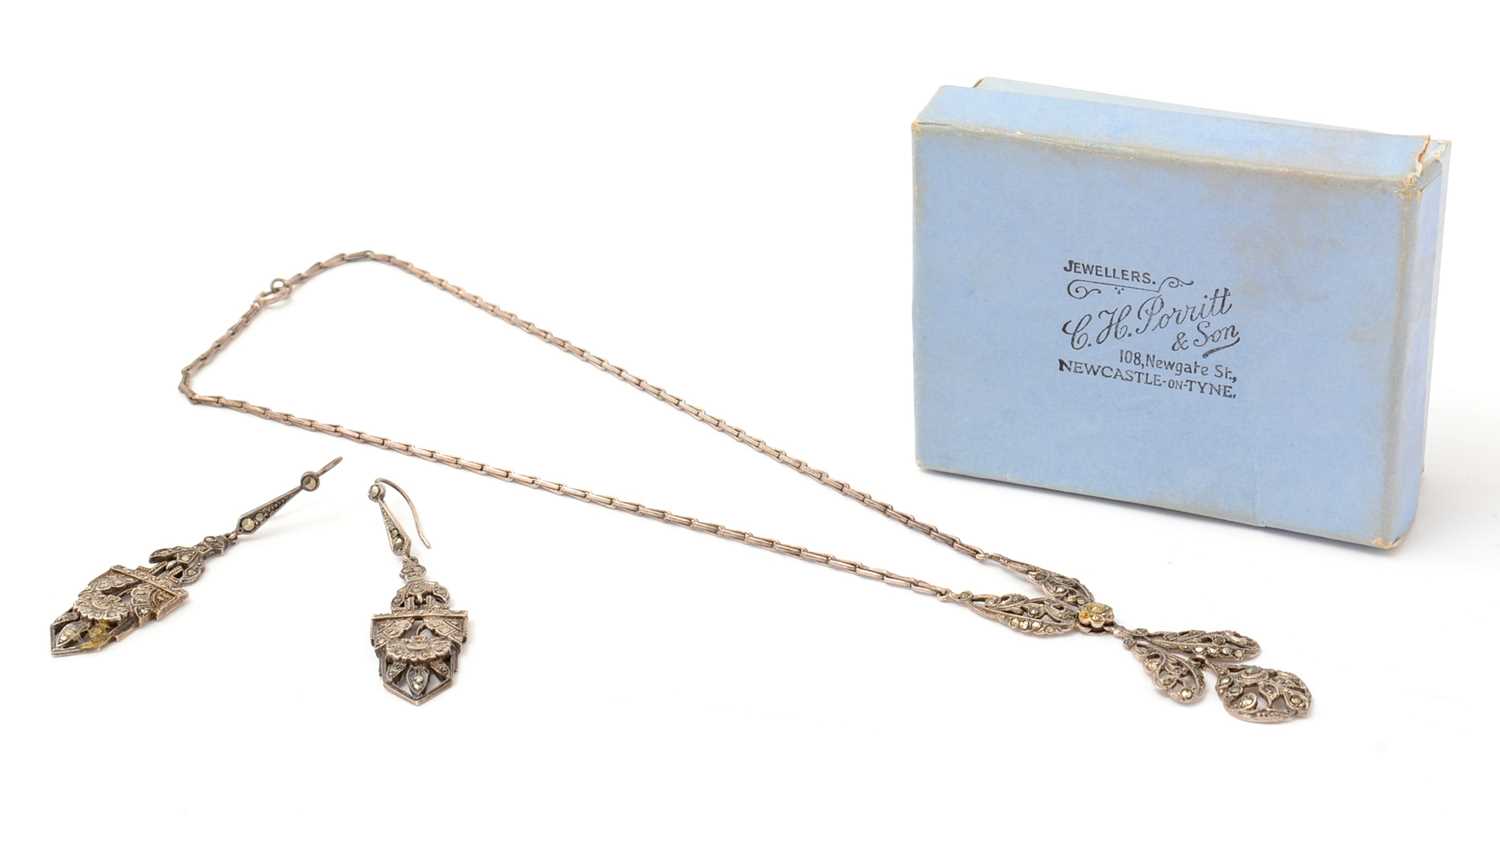 Lot 4 - A pair of 1920s Aesthetic Movement white-metal and marcasite pendant earrings and necklace